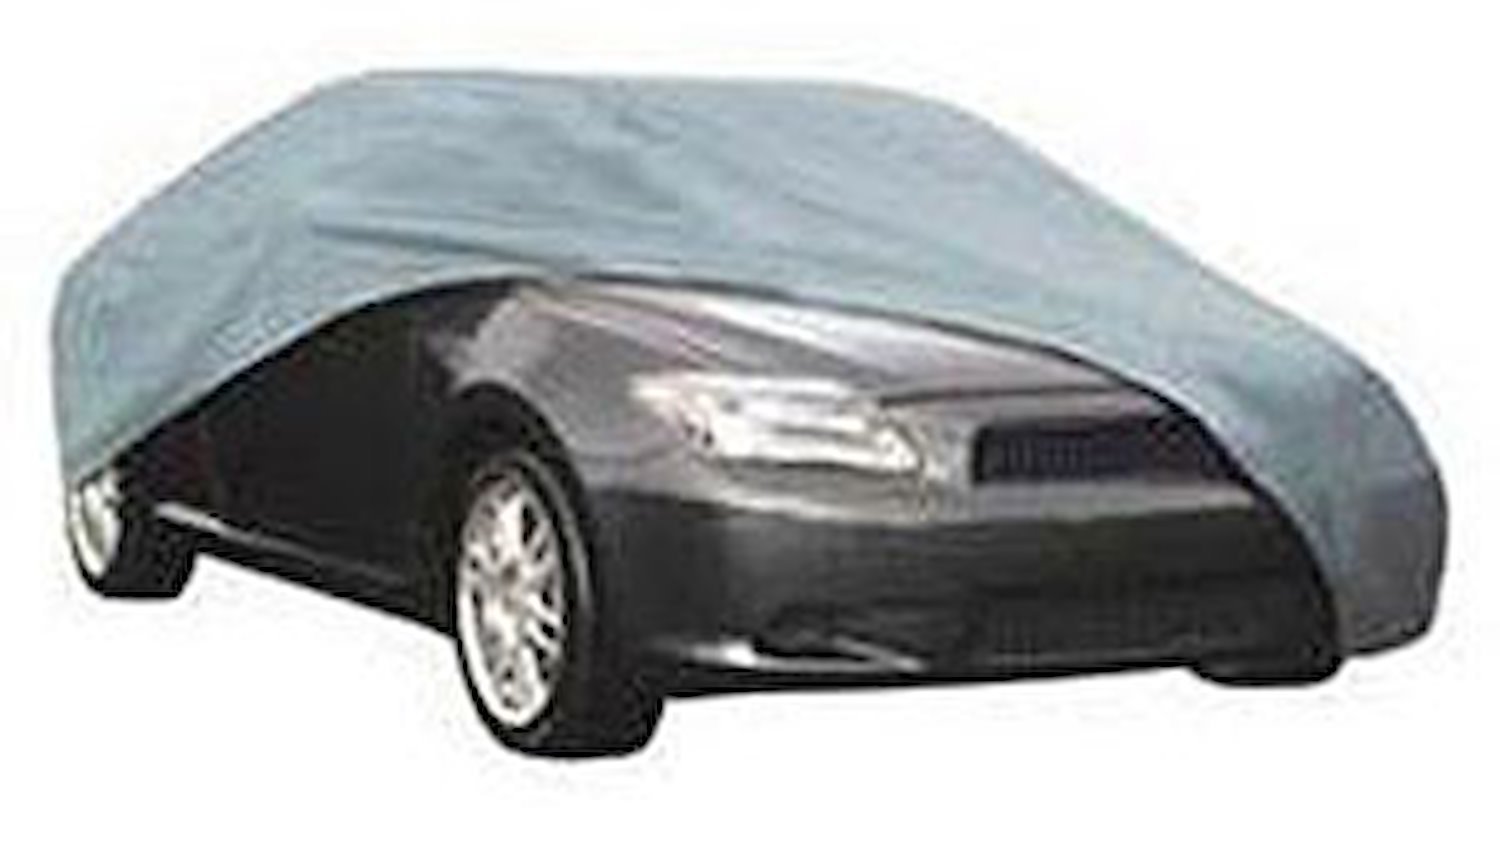 Budge Lite Car Cover Fits Cars Up To 14" 2" in Length